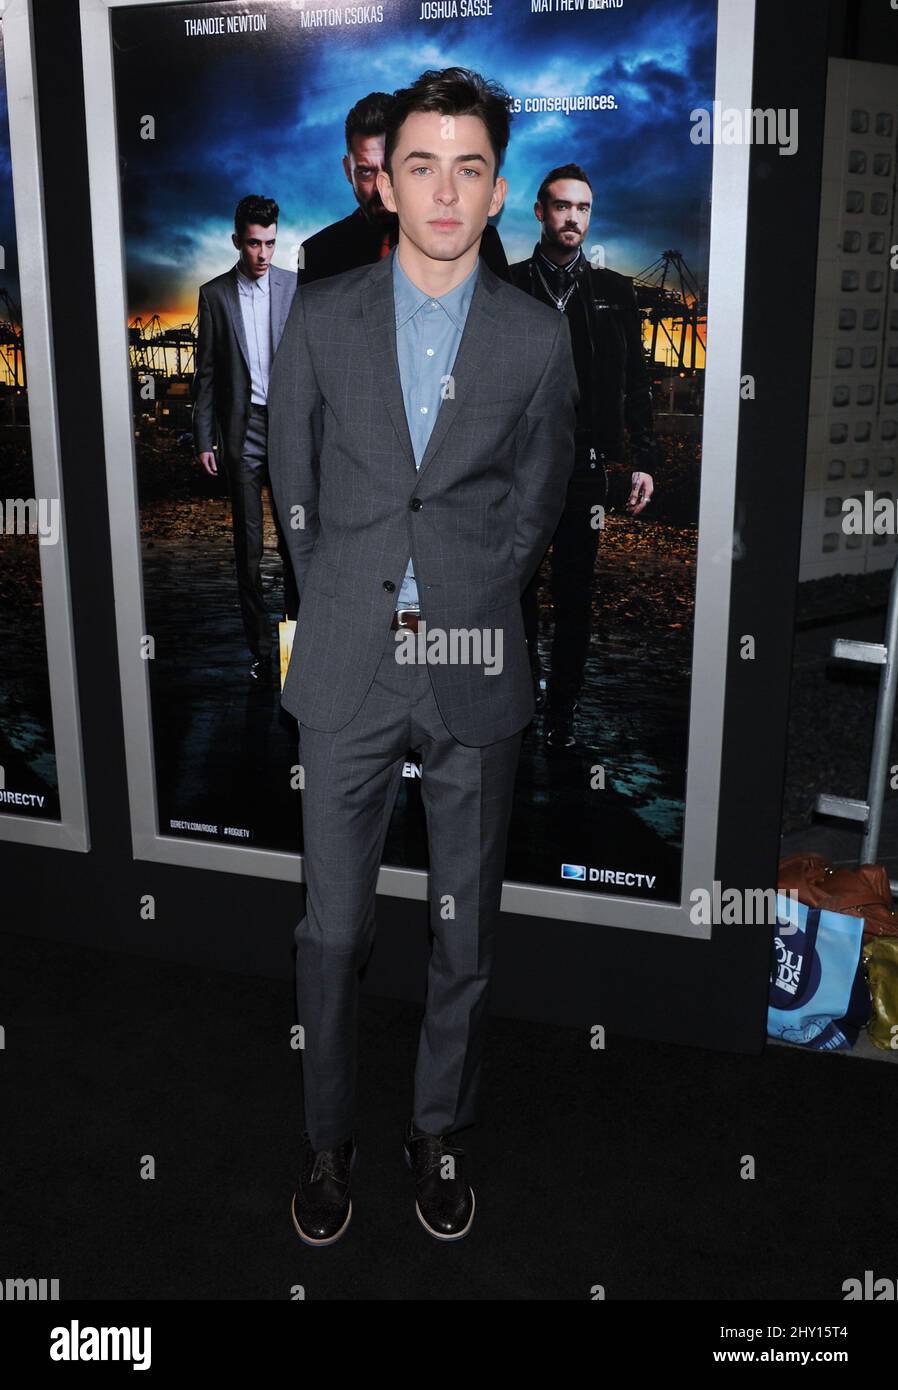 Matthew Beard attending the premiere of 'Rogue' held at the ArcLight Cinerama Dome in Los Angeles, USA. Stock Photo